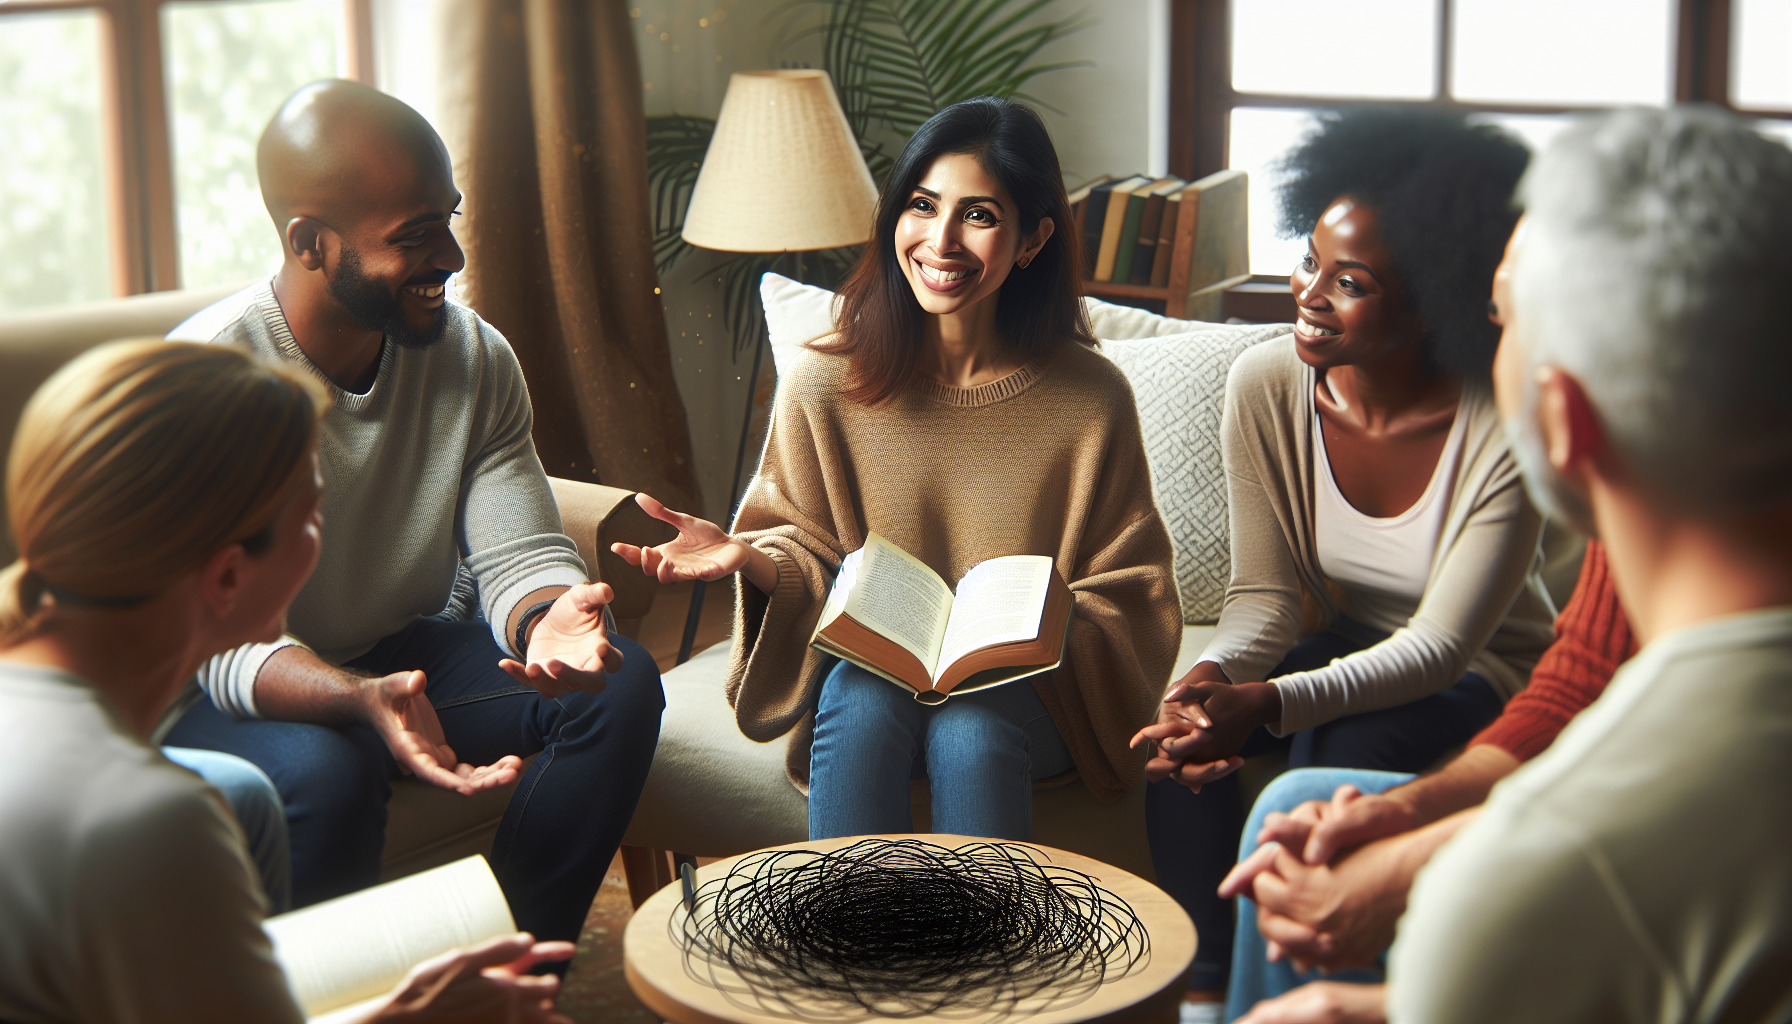 Woman leading a Bible study group with grace and warmth